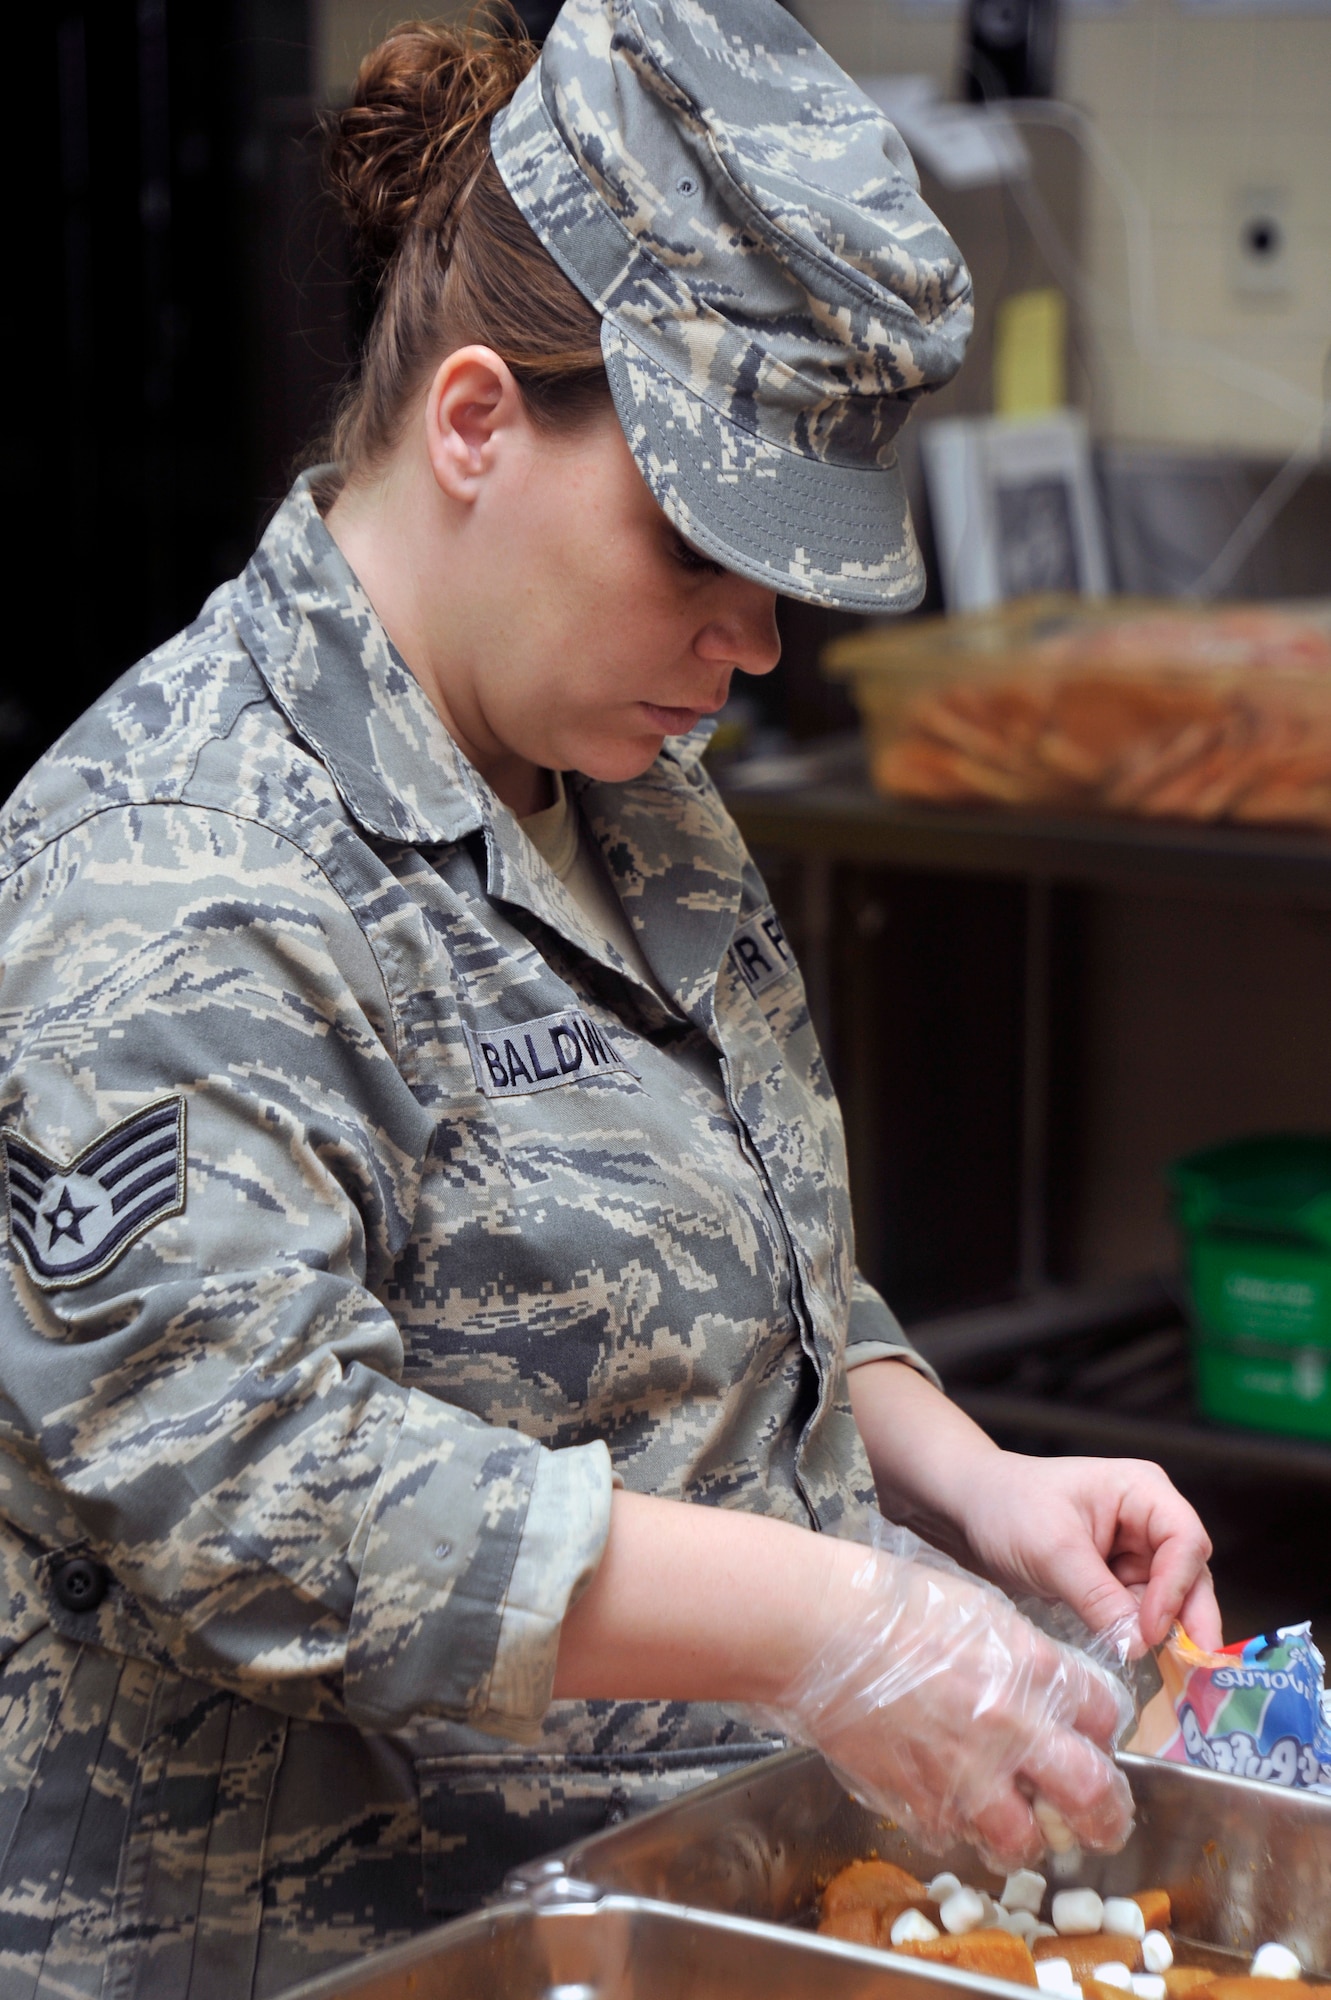 U.S. Air Force Staff Sgt. Jessica Baldwin, 35th Force Support Squadron food services shift leader, adds marshmallows to sweet potatoes in the Grissom Dining Facility kitchen while preparing for lunch at Misawa Air Base, Japan, April 18, 2013. Food services Airmen begin preparing meals at the dining facility about an hour and a half before the first customer is served.  (U.S. Air Force photo by Airman 1st Class Zachary Kee)